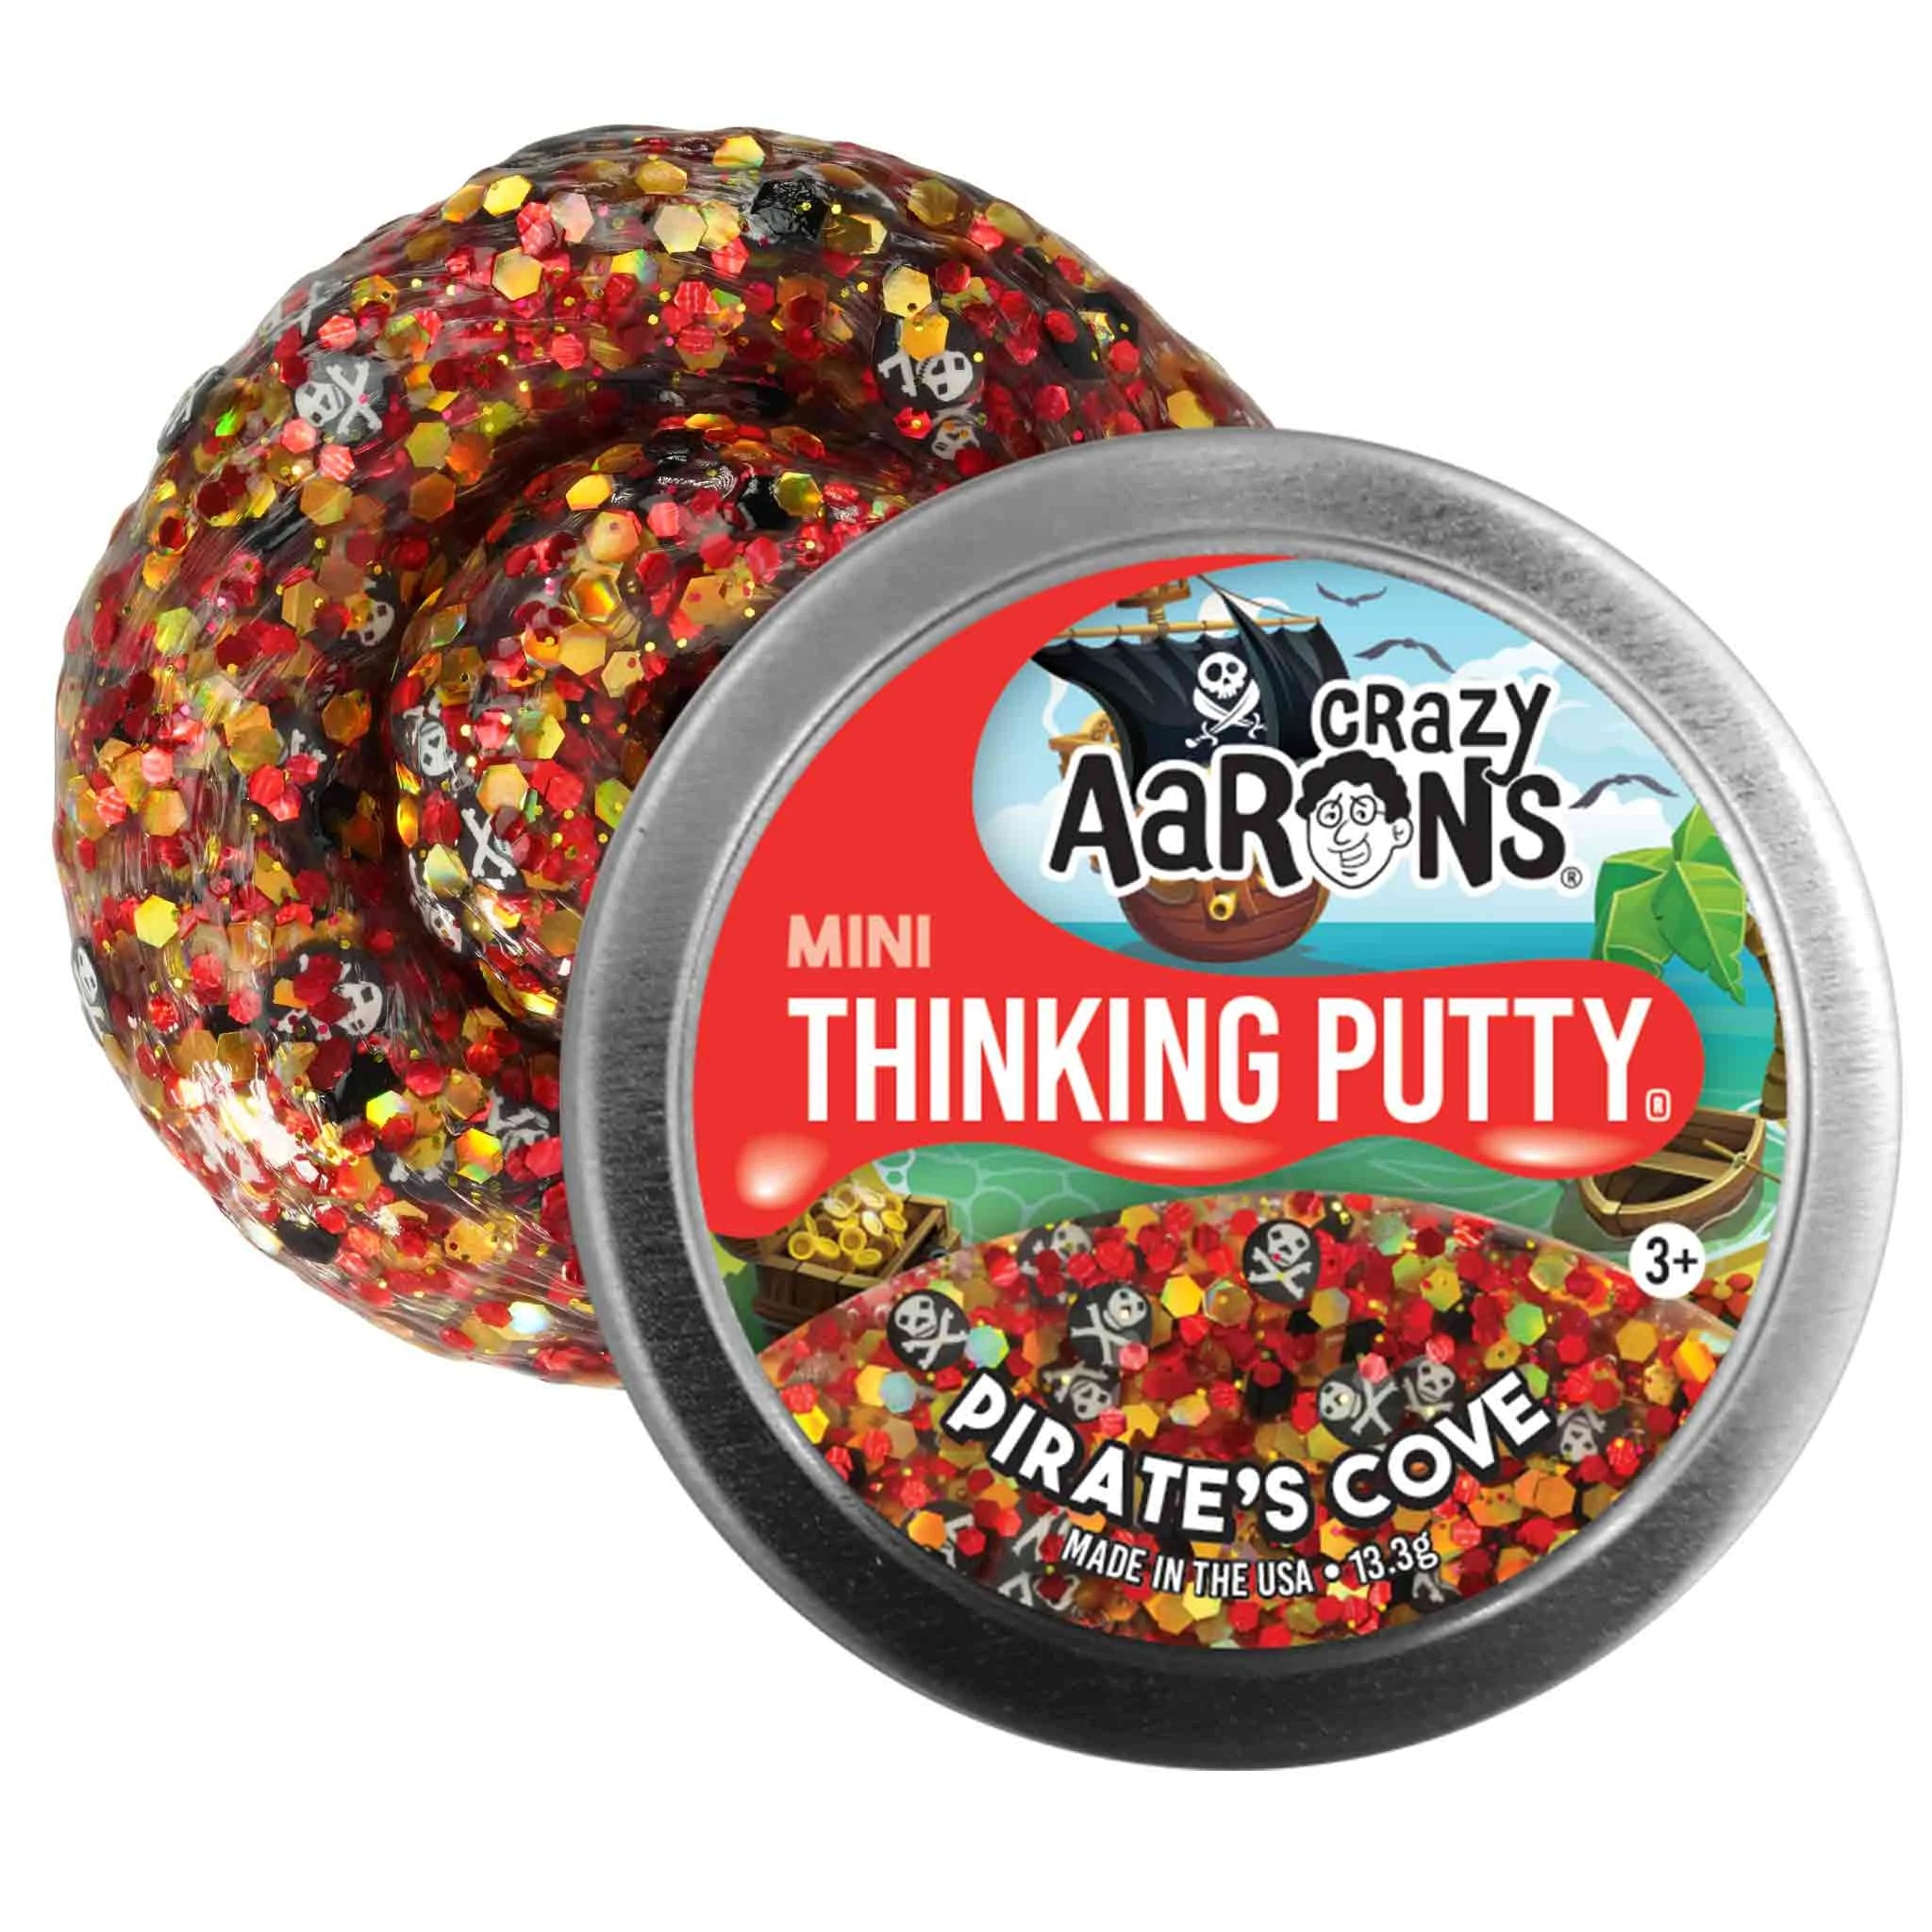 Pirate’s Cove Putty 2” Thinking Putty by Crazy Aaron’s